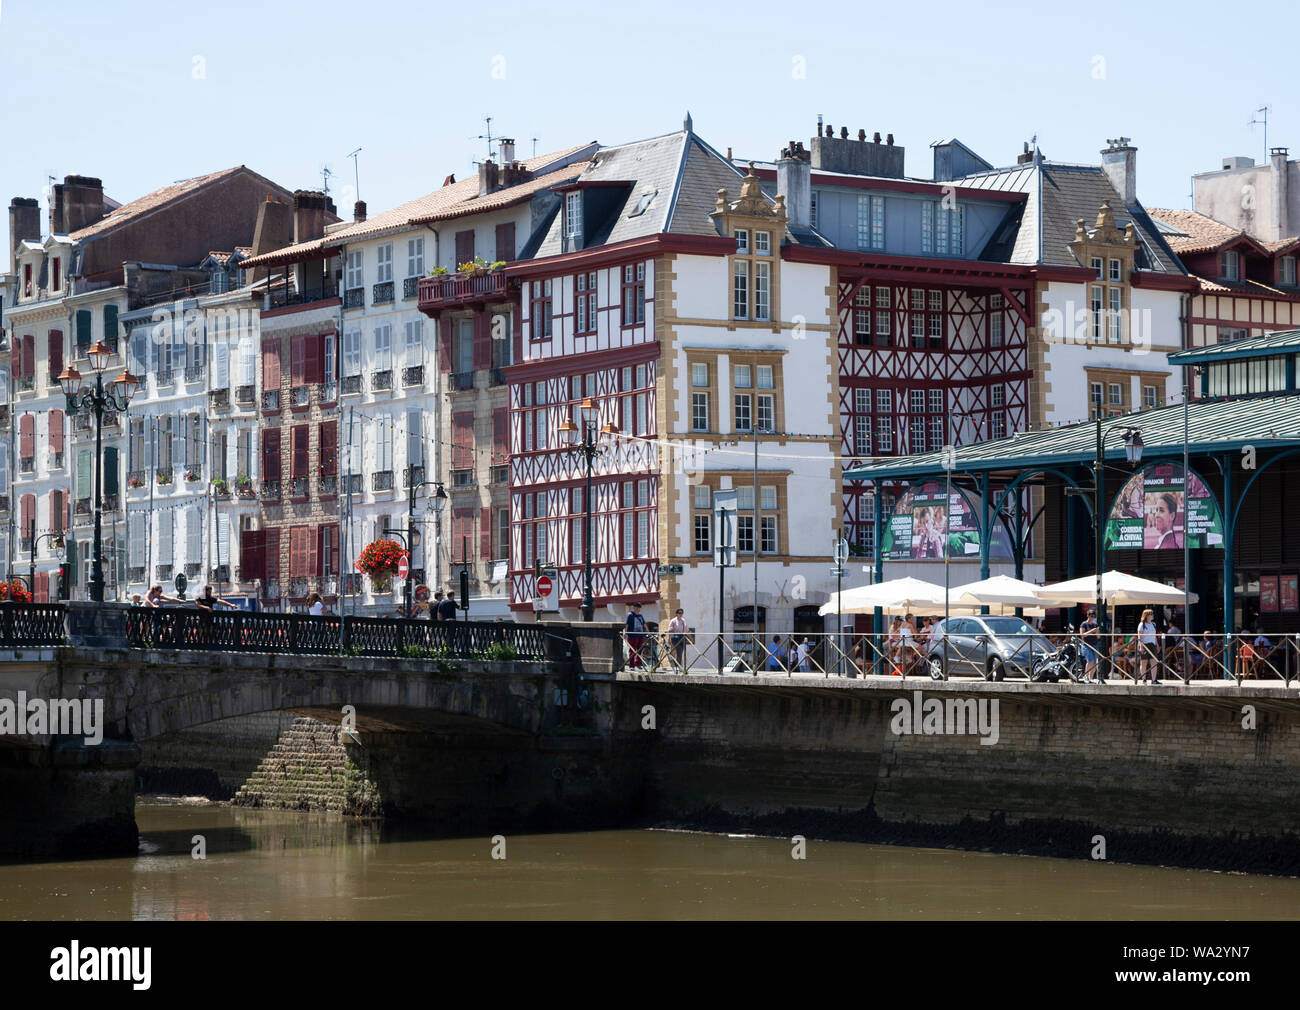 Beautiful half-timbered building - recently renovated - located near the market halls of Bayonne and the Nive river. Bel immeuble à colombages. Stock Photo